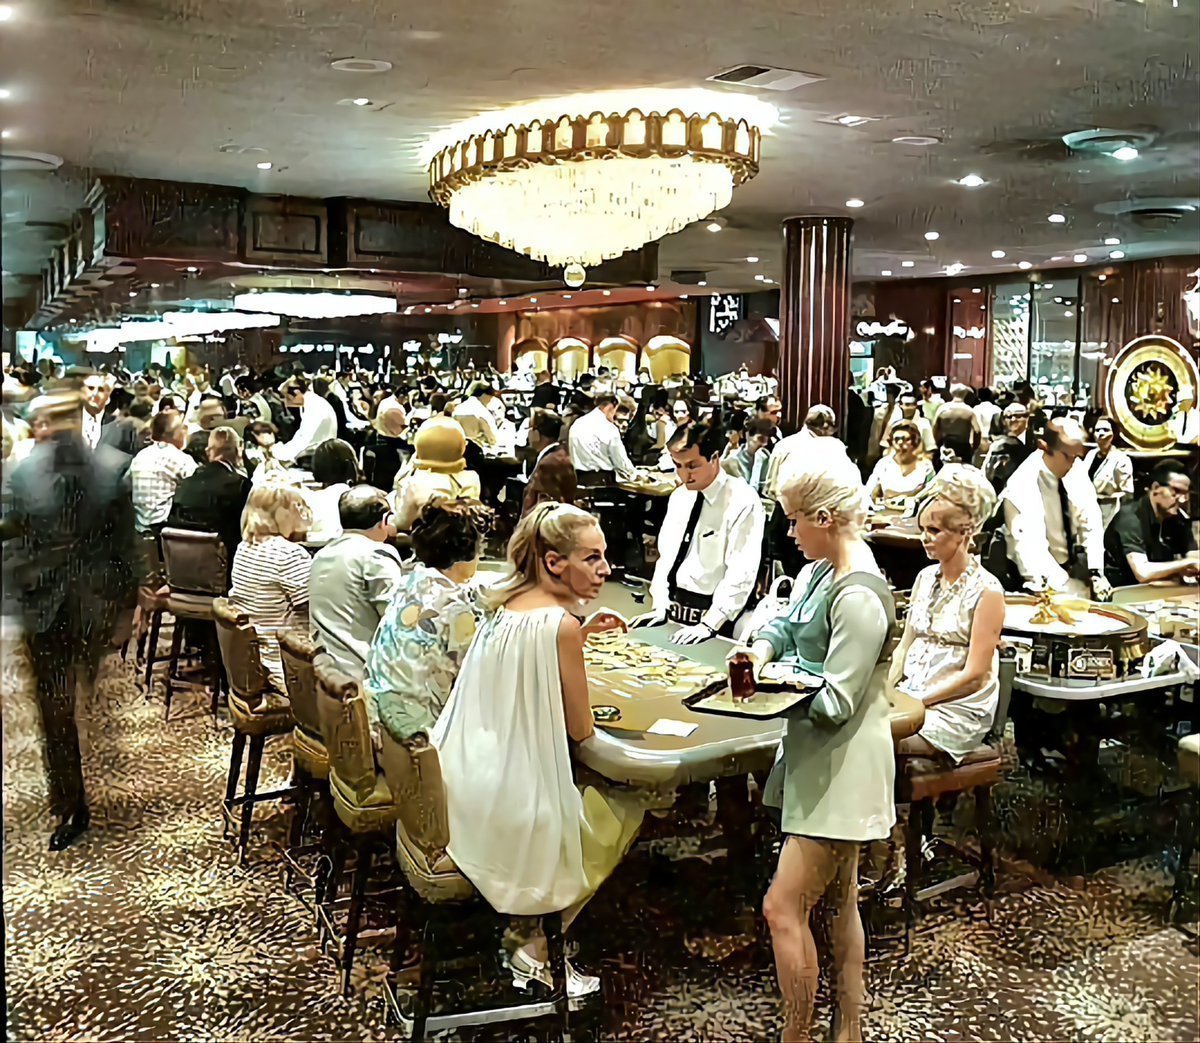 inside the room - Picture of Casino at the Riviera Hotel, Las